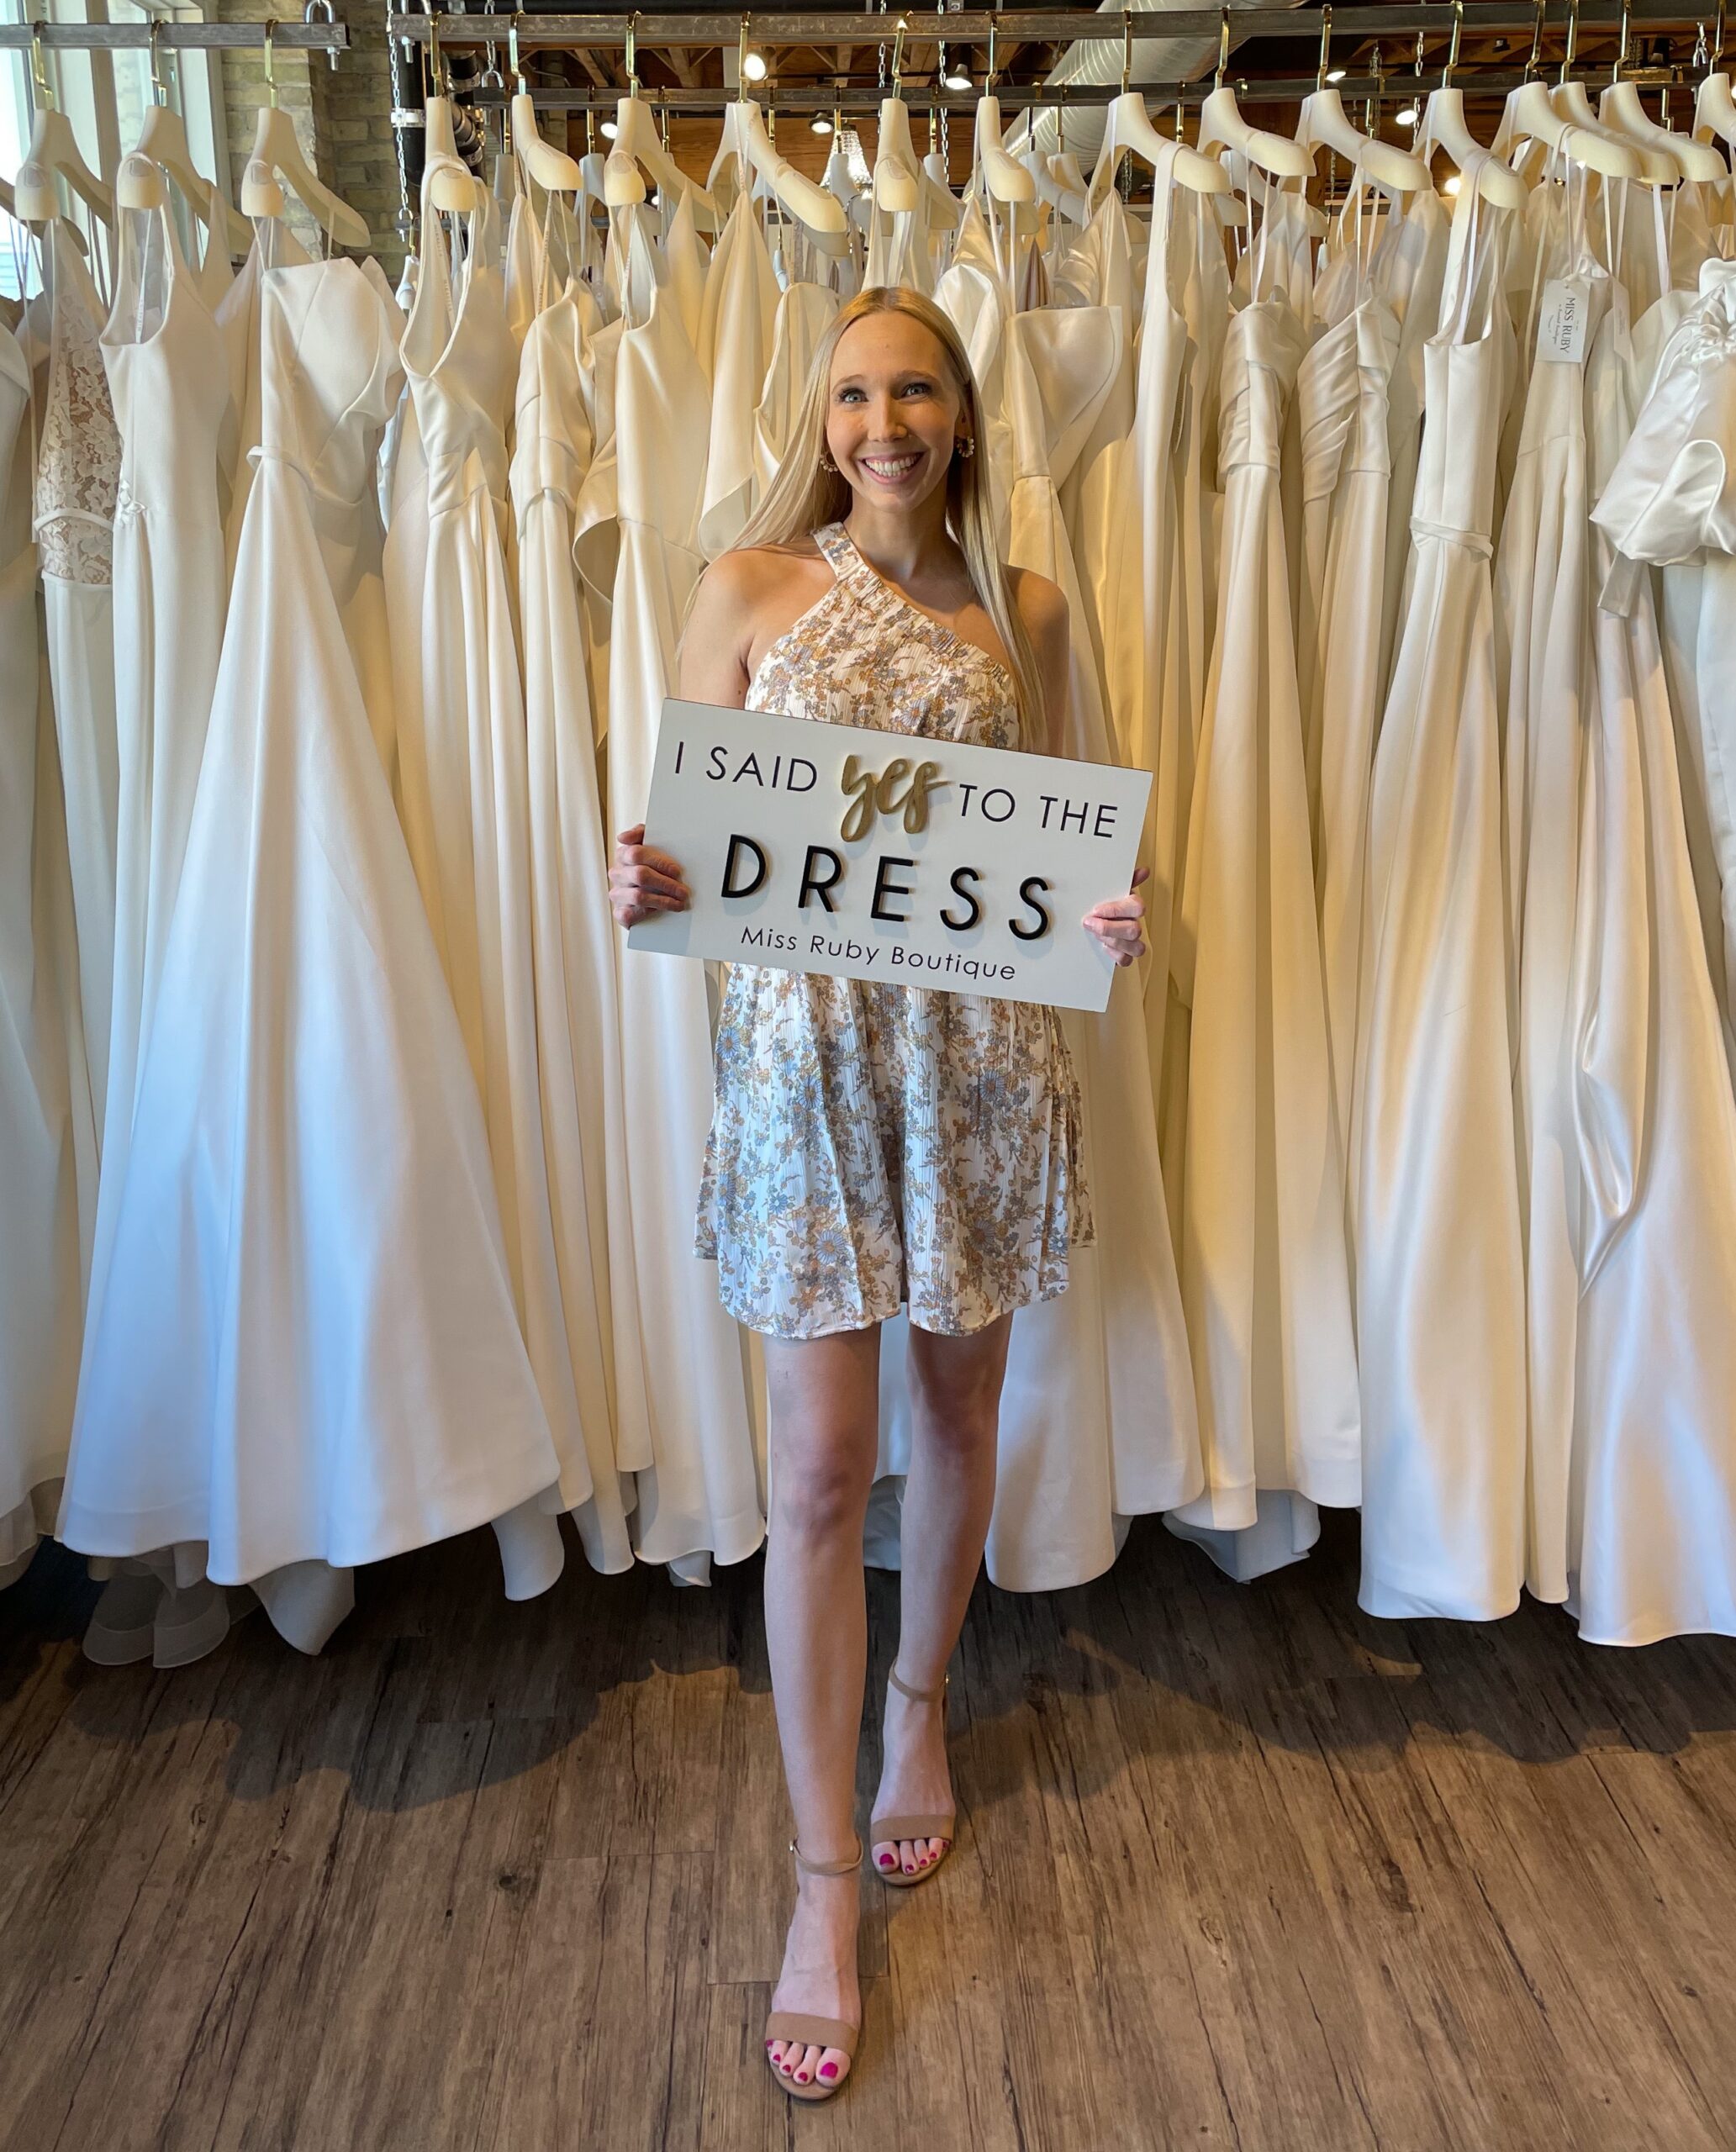 What to Wear Wedding Dress Shopping: Things to Bring + What I Wish